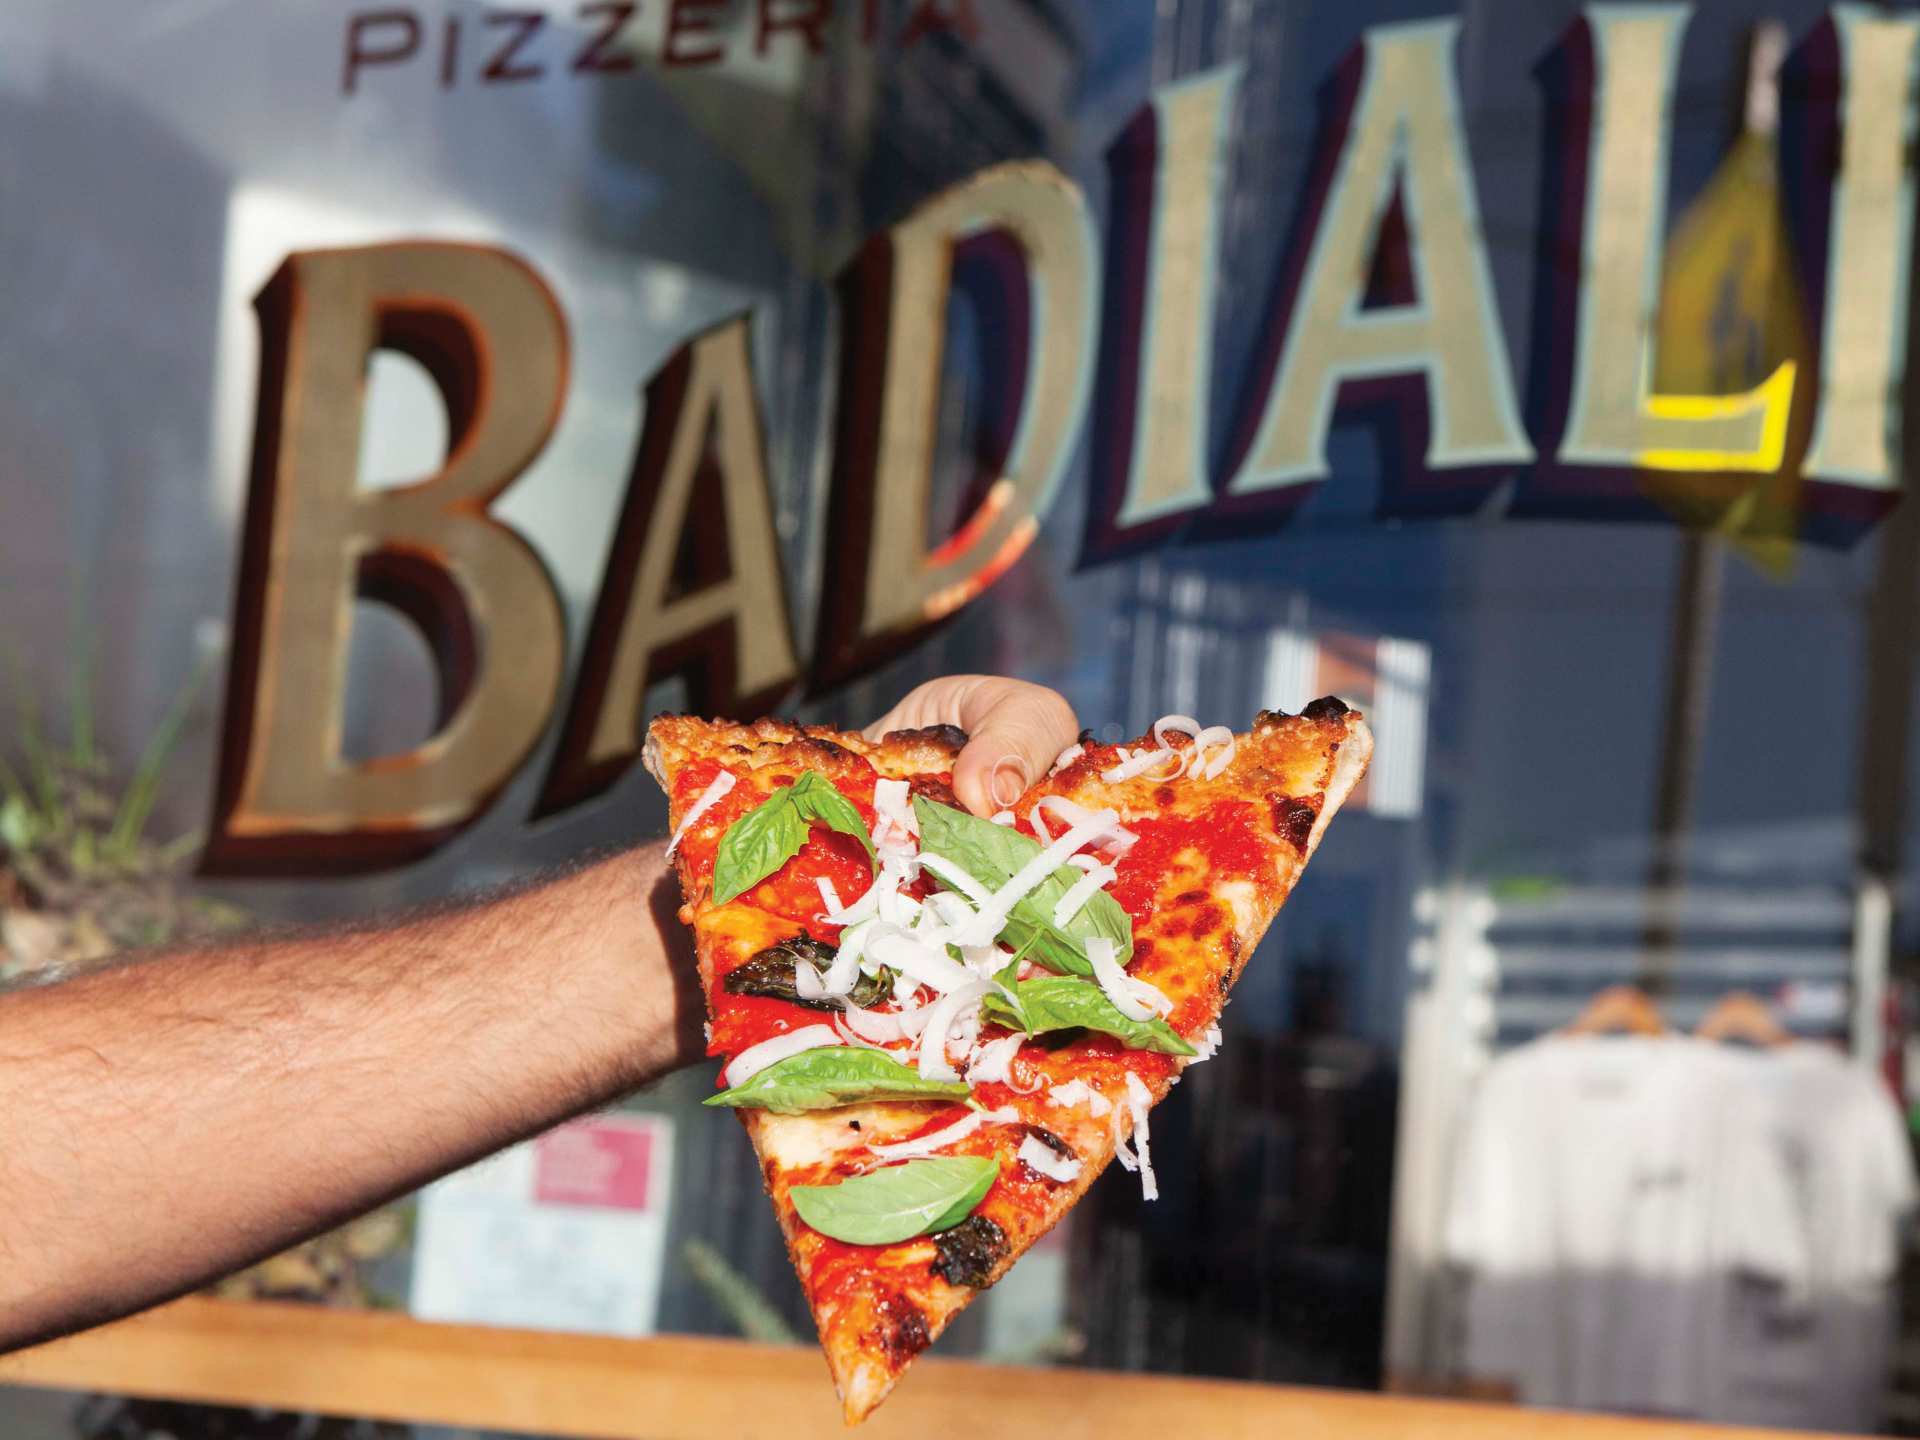 A slice of pizza at Pizzeria Badiali